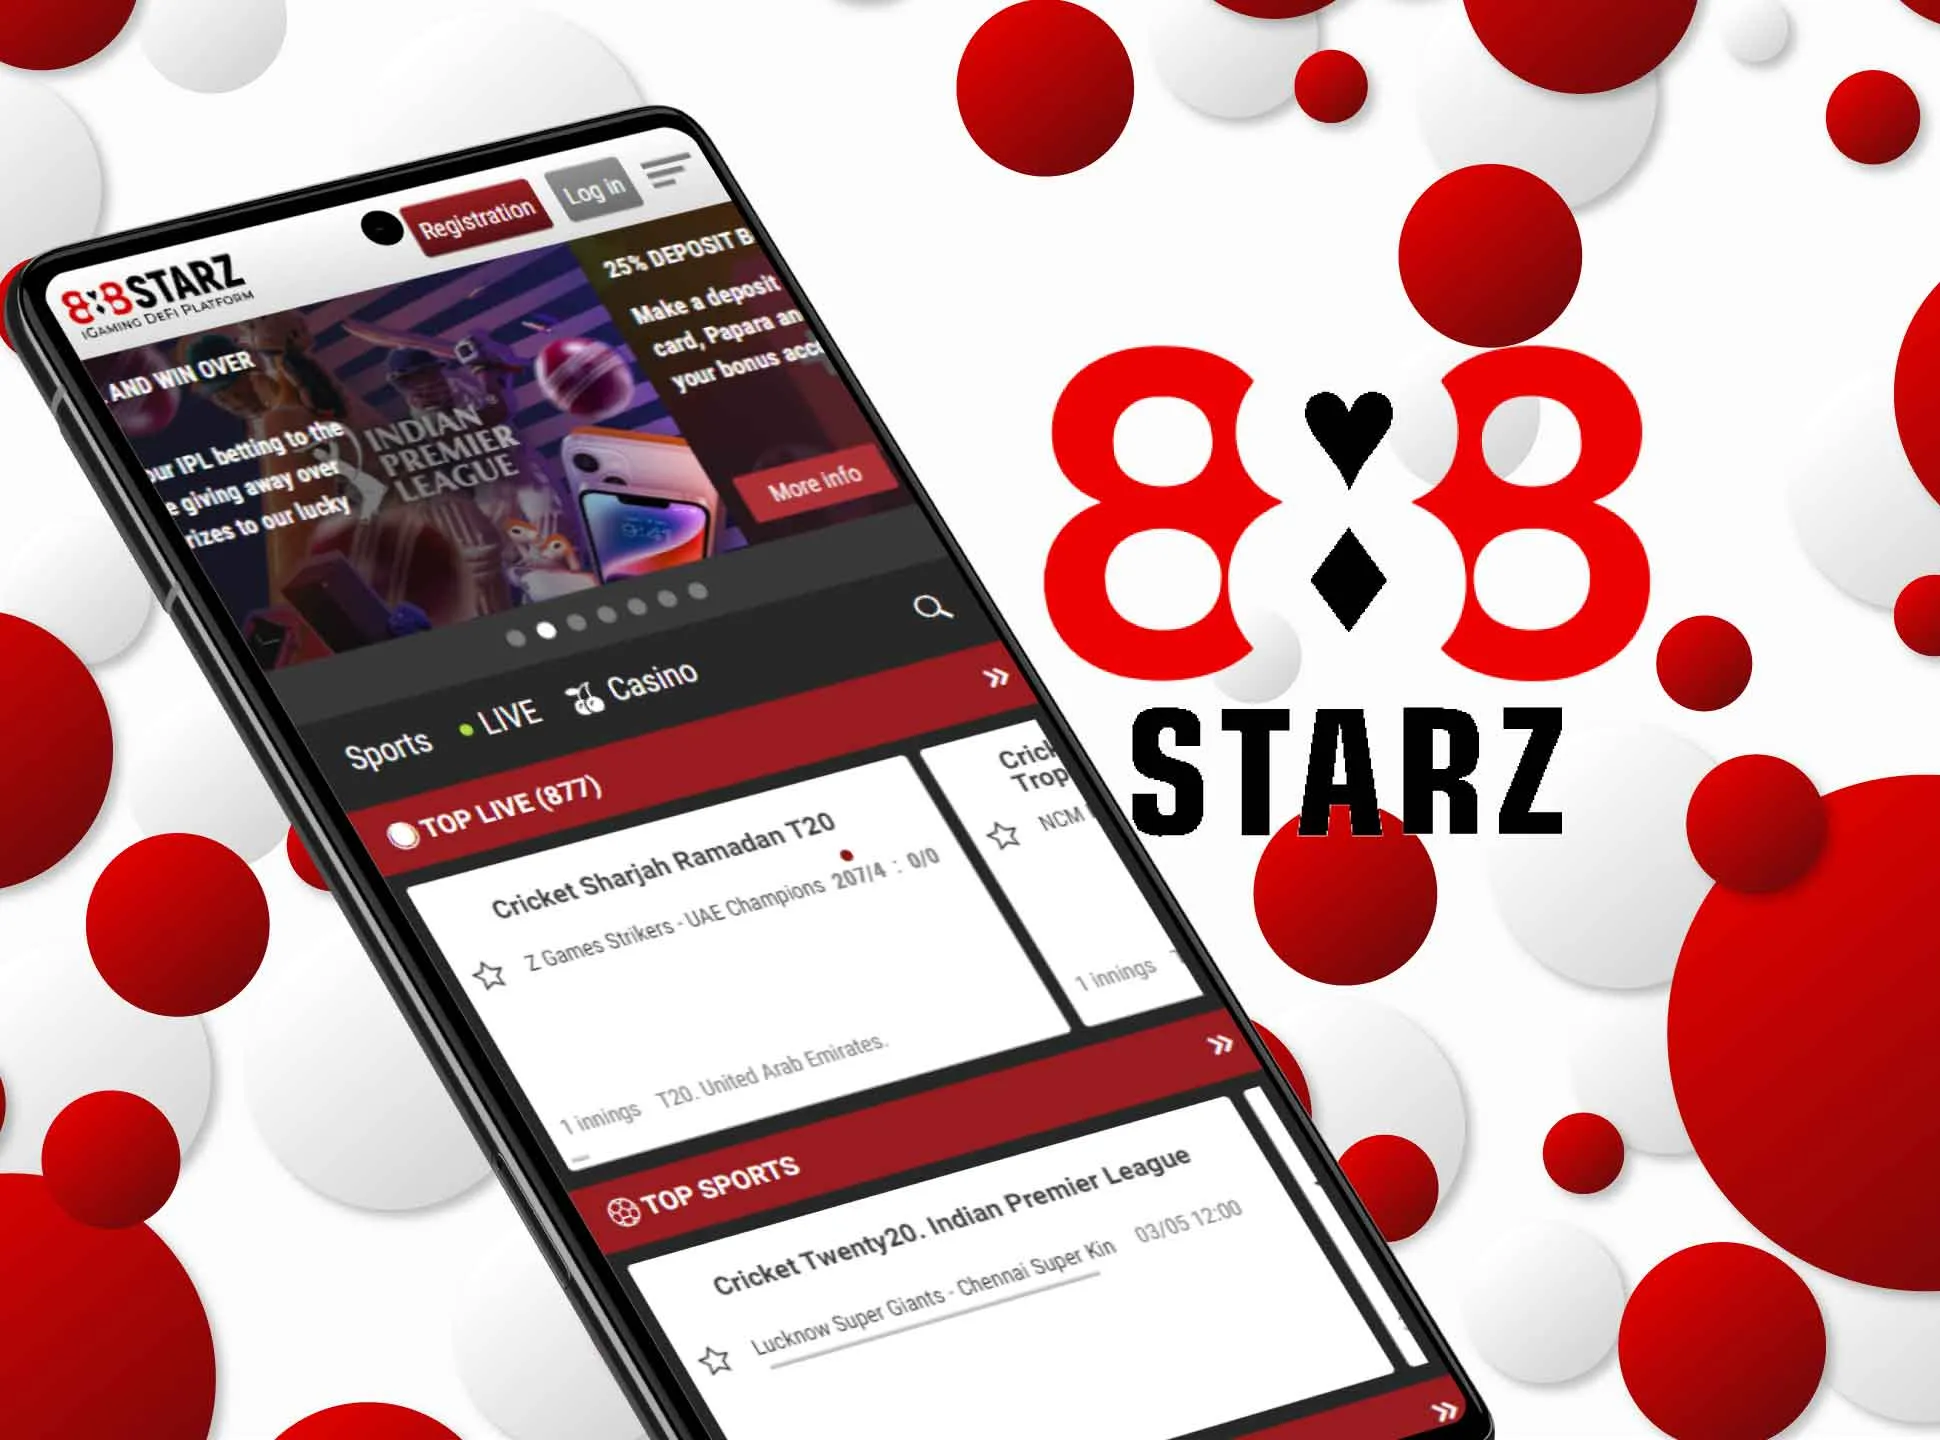 Open the app and start playing on 888starz.